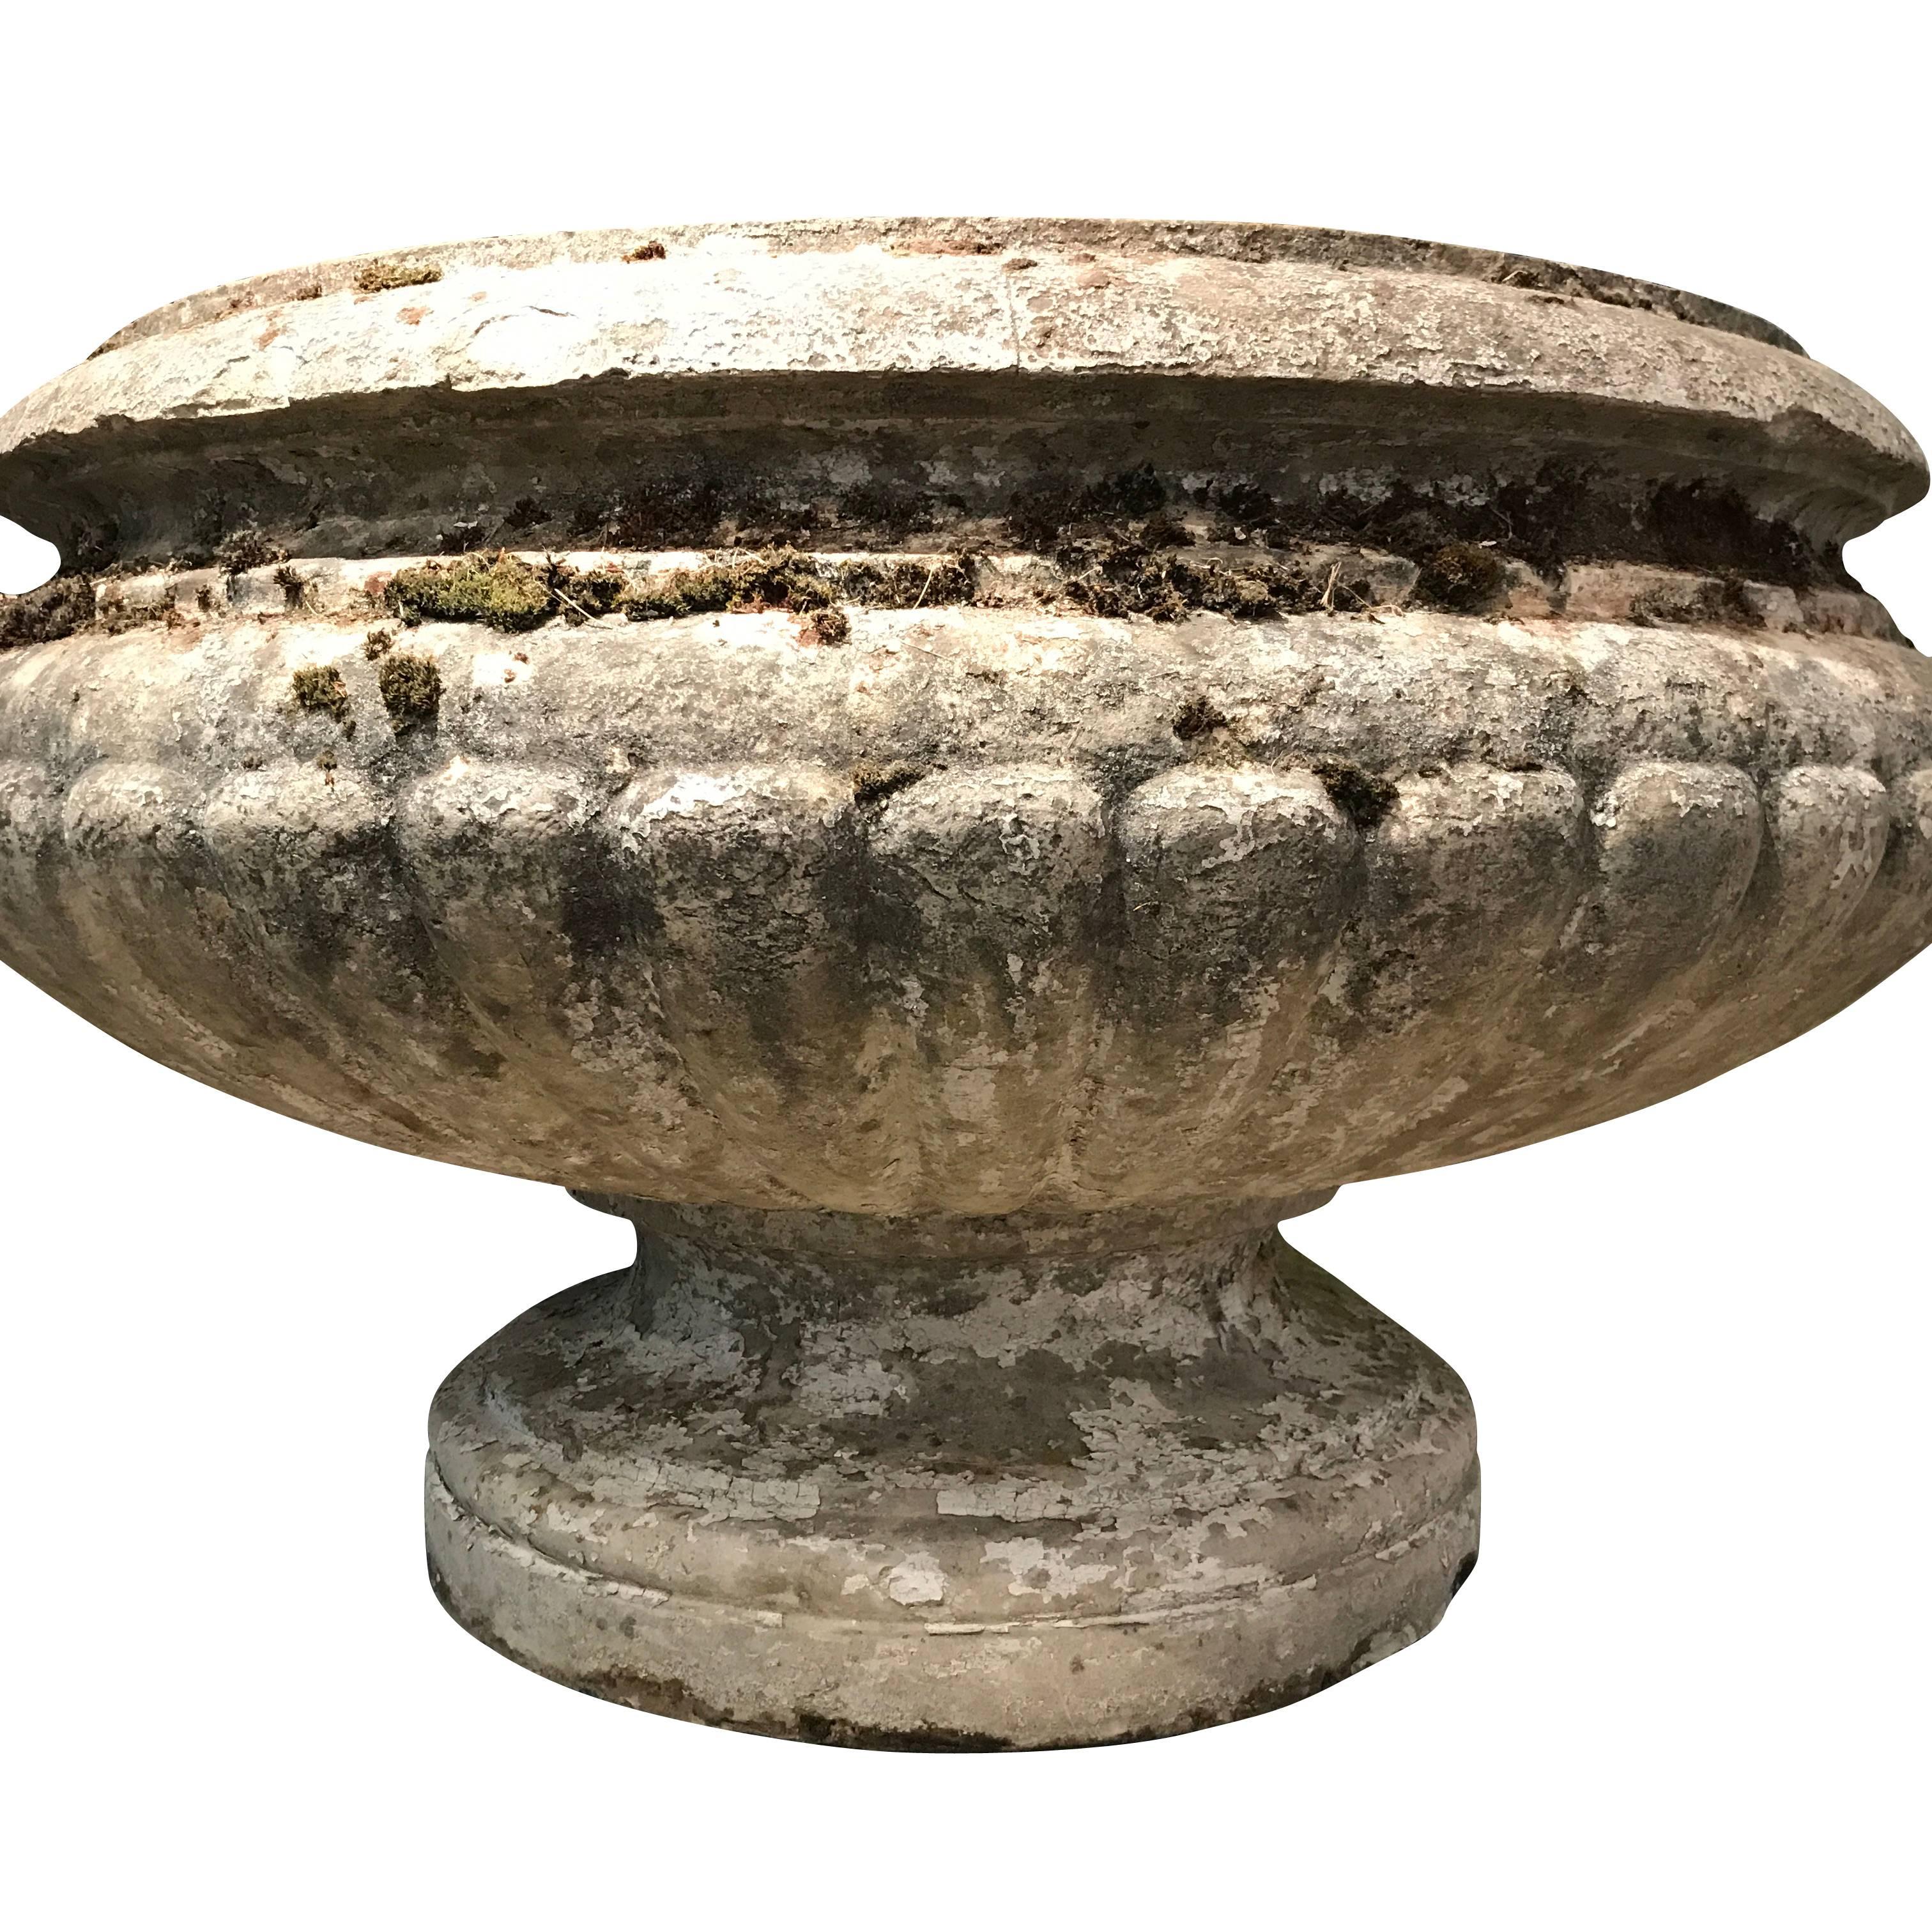 19th century, French very large one piece stone urn. 
Classic design.
Beautiful natural aged patina.
Impressive centerpiece in a garden.